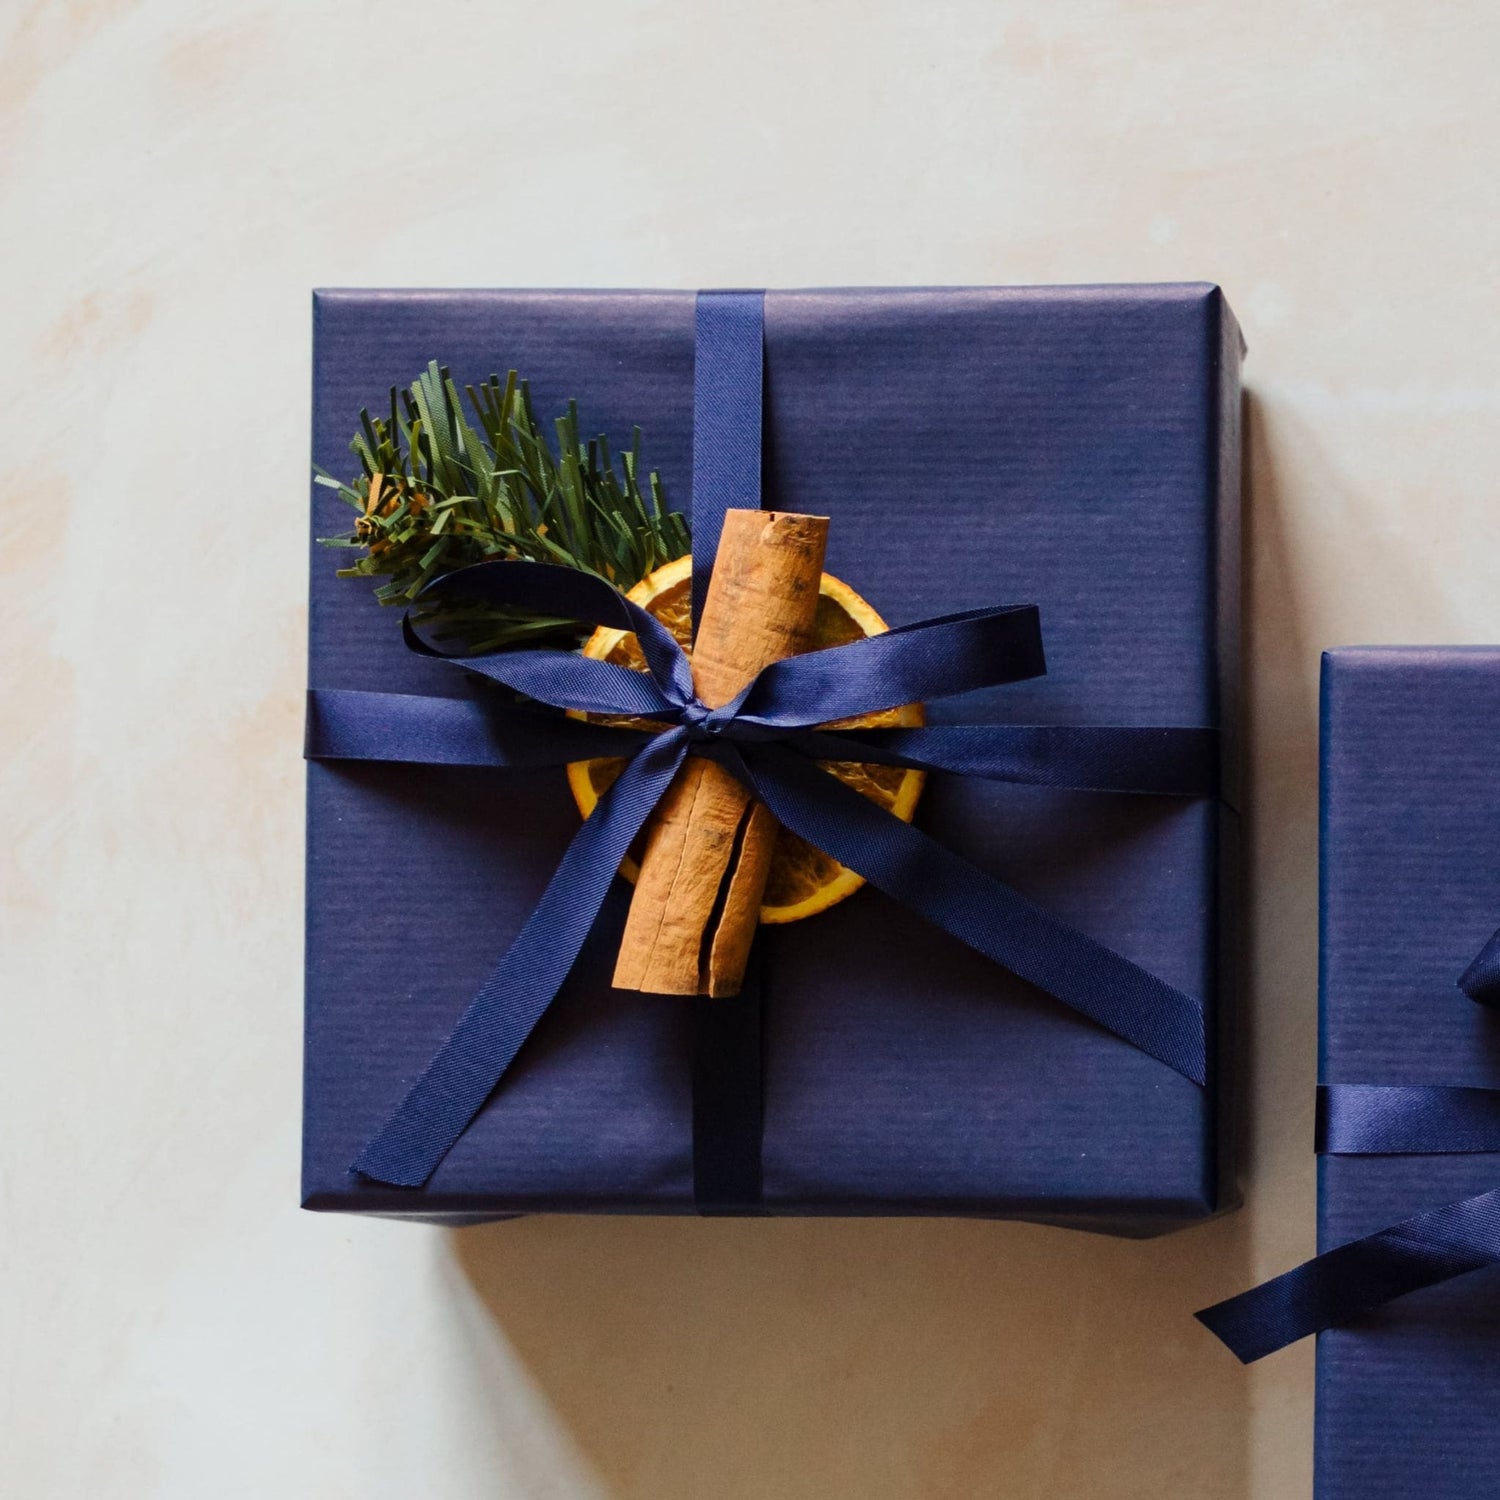 A 400g woody 3 wick soy candle from the Home County Co. is shown with luxury Christmas Gift Wrap. The 3 wick candle is wrapped in luxury navy wrapping paper secured with navy ribbon and Christmas embellishments.